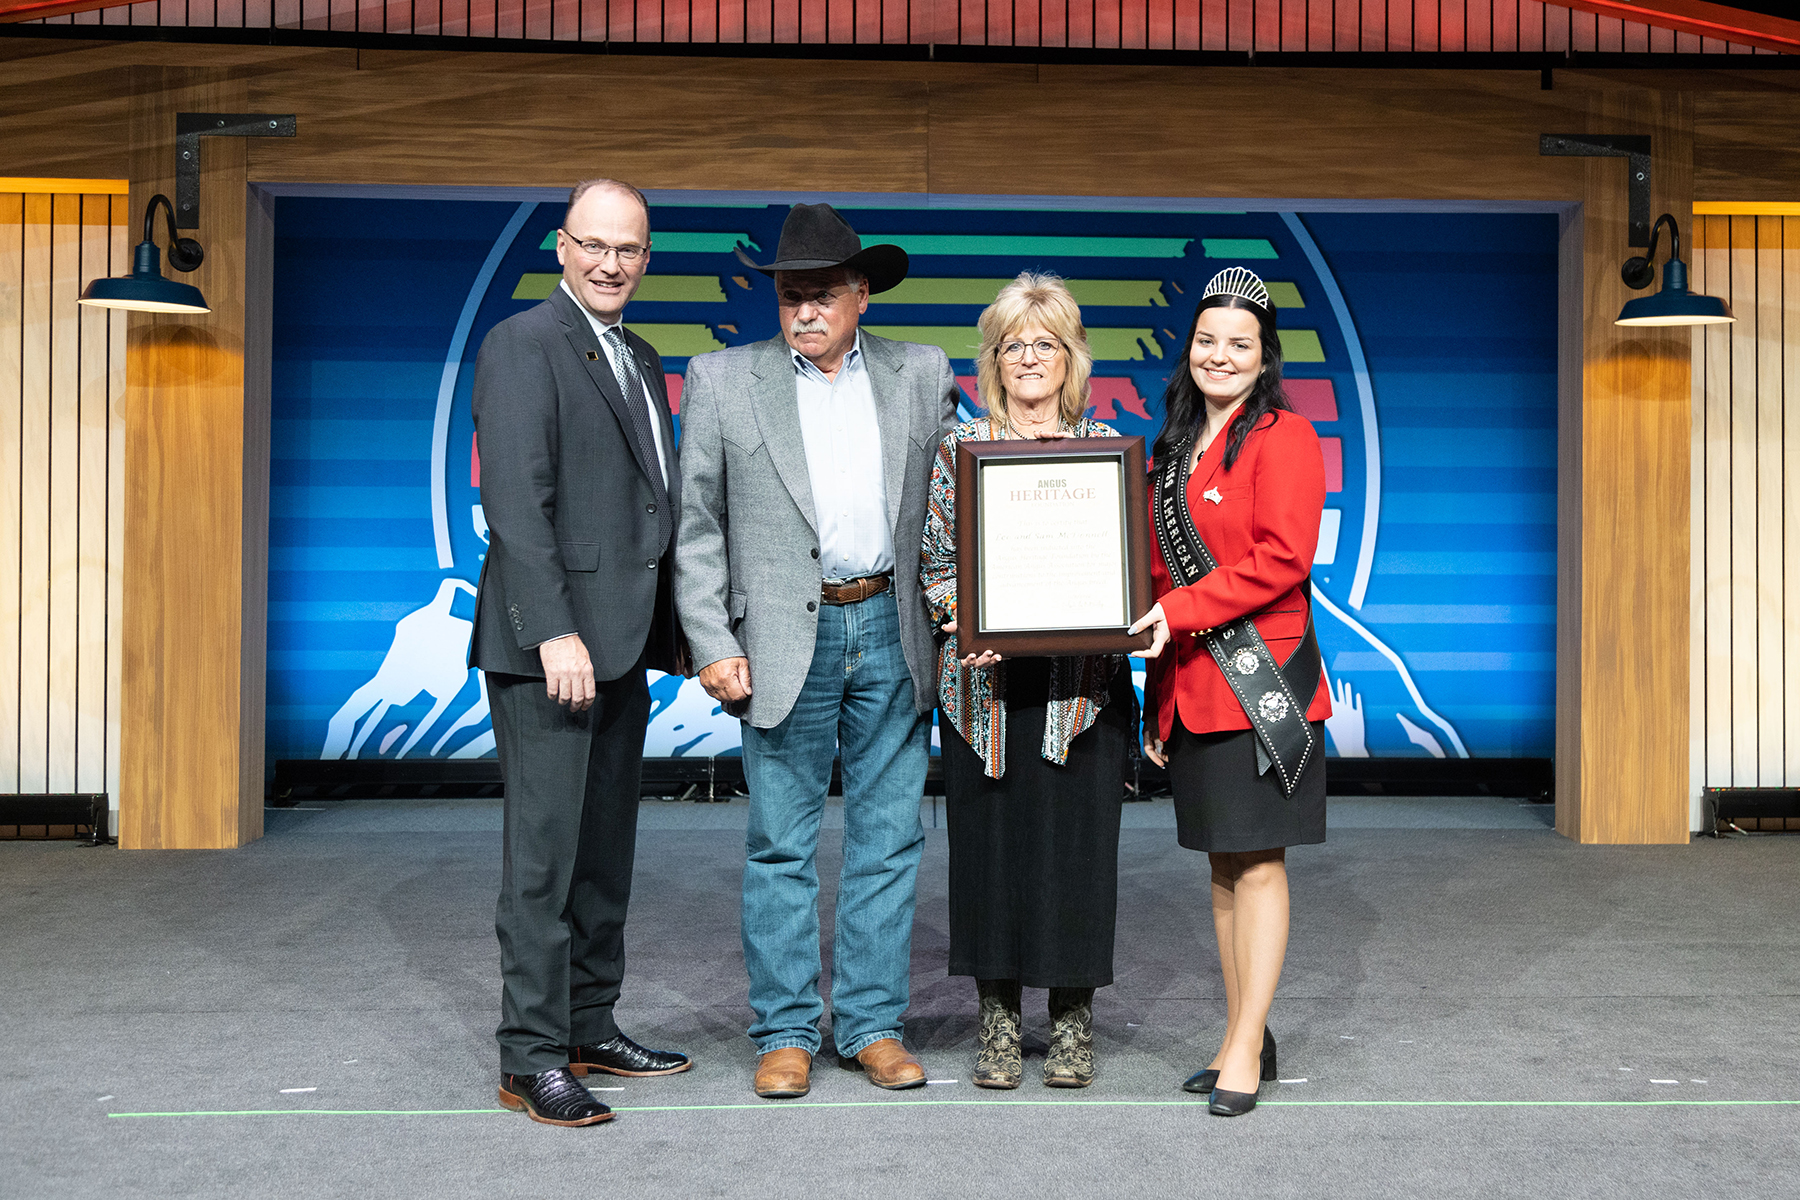  Leo and Sam McDonnell, Columbus, Mont., were inducted into the Angus Heritage Foundation, Nov. 6 during the American Angus Association's Awards Recognition Dinner, at the 2022 Angus Convention in Salt Lake City, Utah. Pictured from left are Mark McCully, American Angus Association CEO Leo McDonnell, Sam McDonnell, Mary Woods, 2022 Miss American Angus.